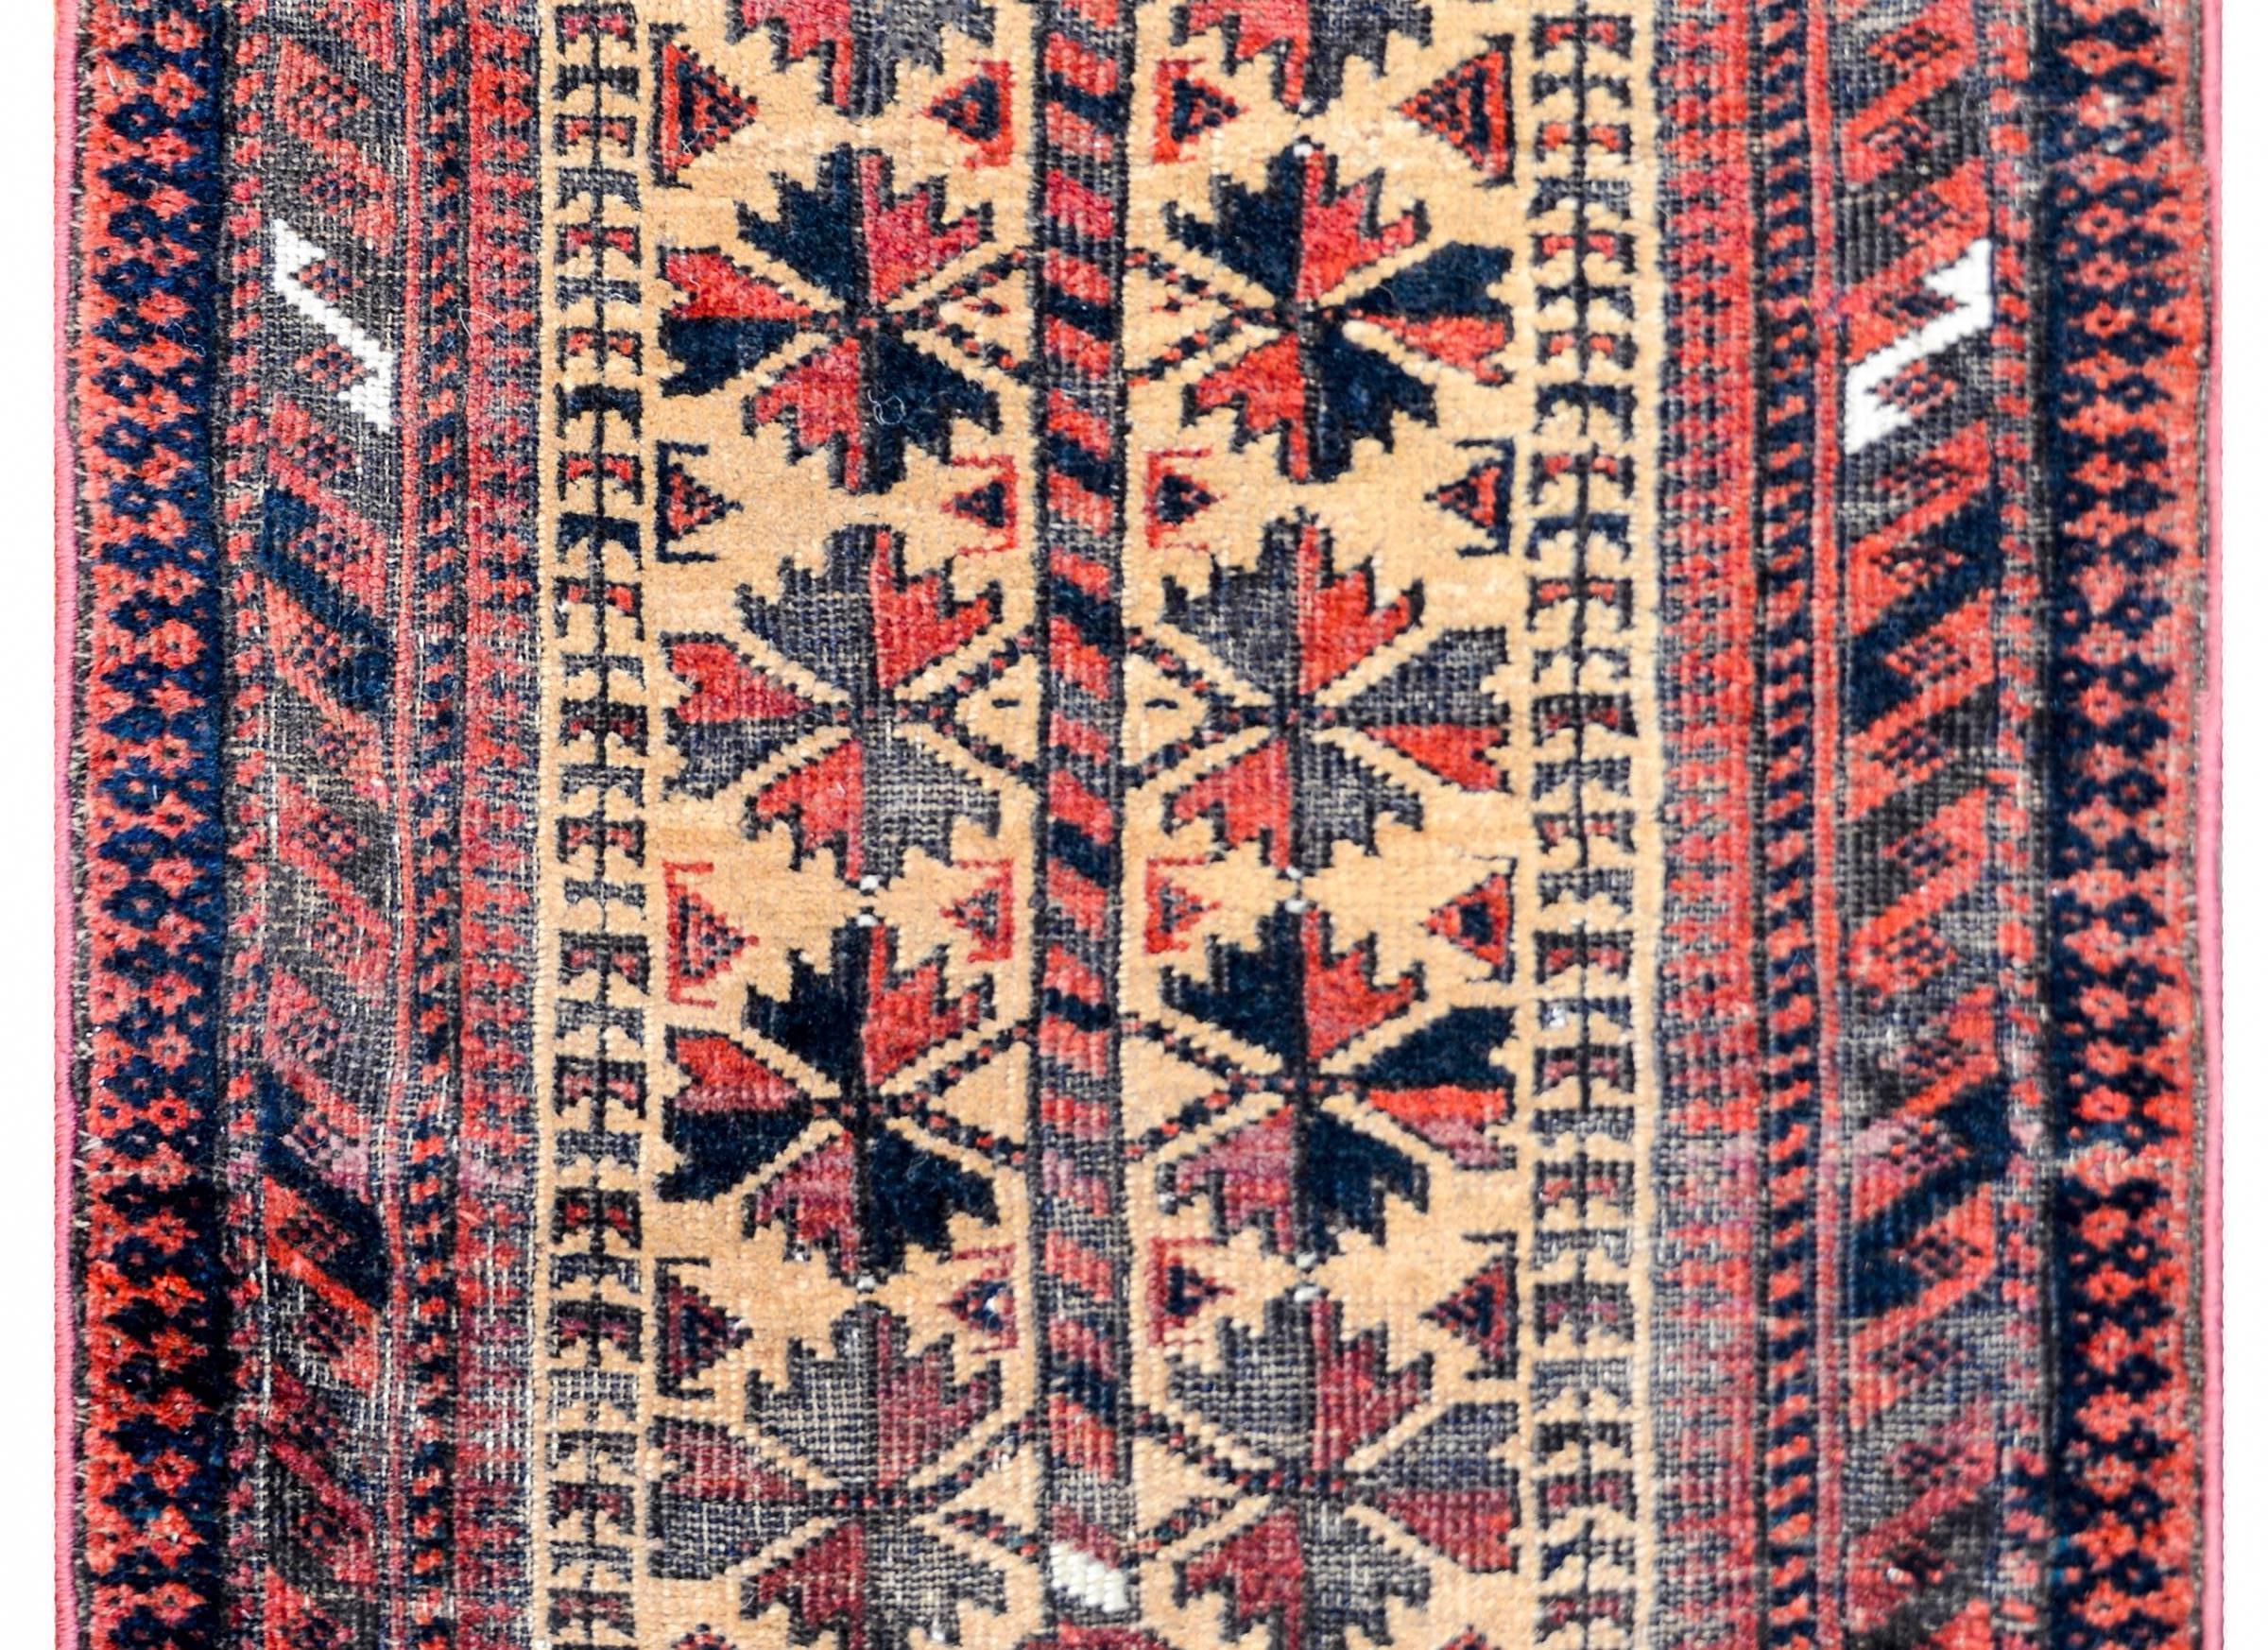 A wonderful early 20th century antique Persian Baluch rug with an all-over leaf pattern woven in crimson, black, and green, on a gold background, surrounded by a wide complementary geometric border.